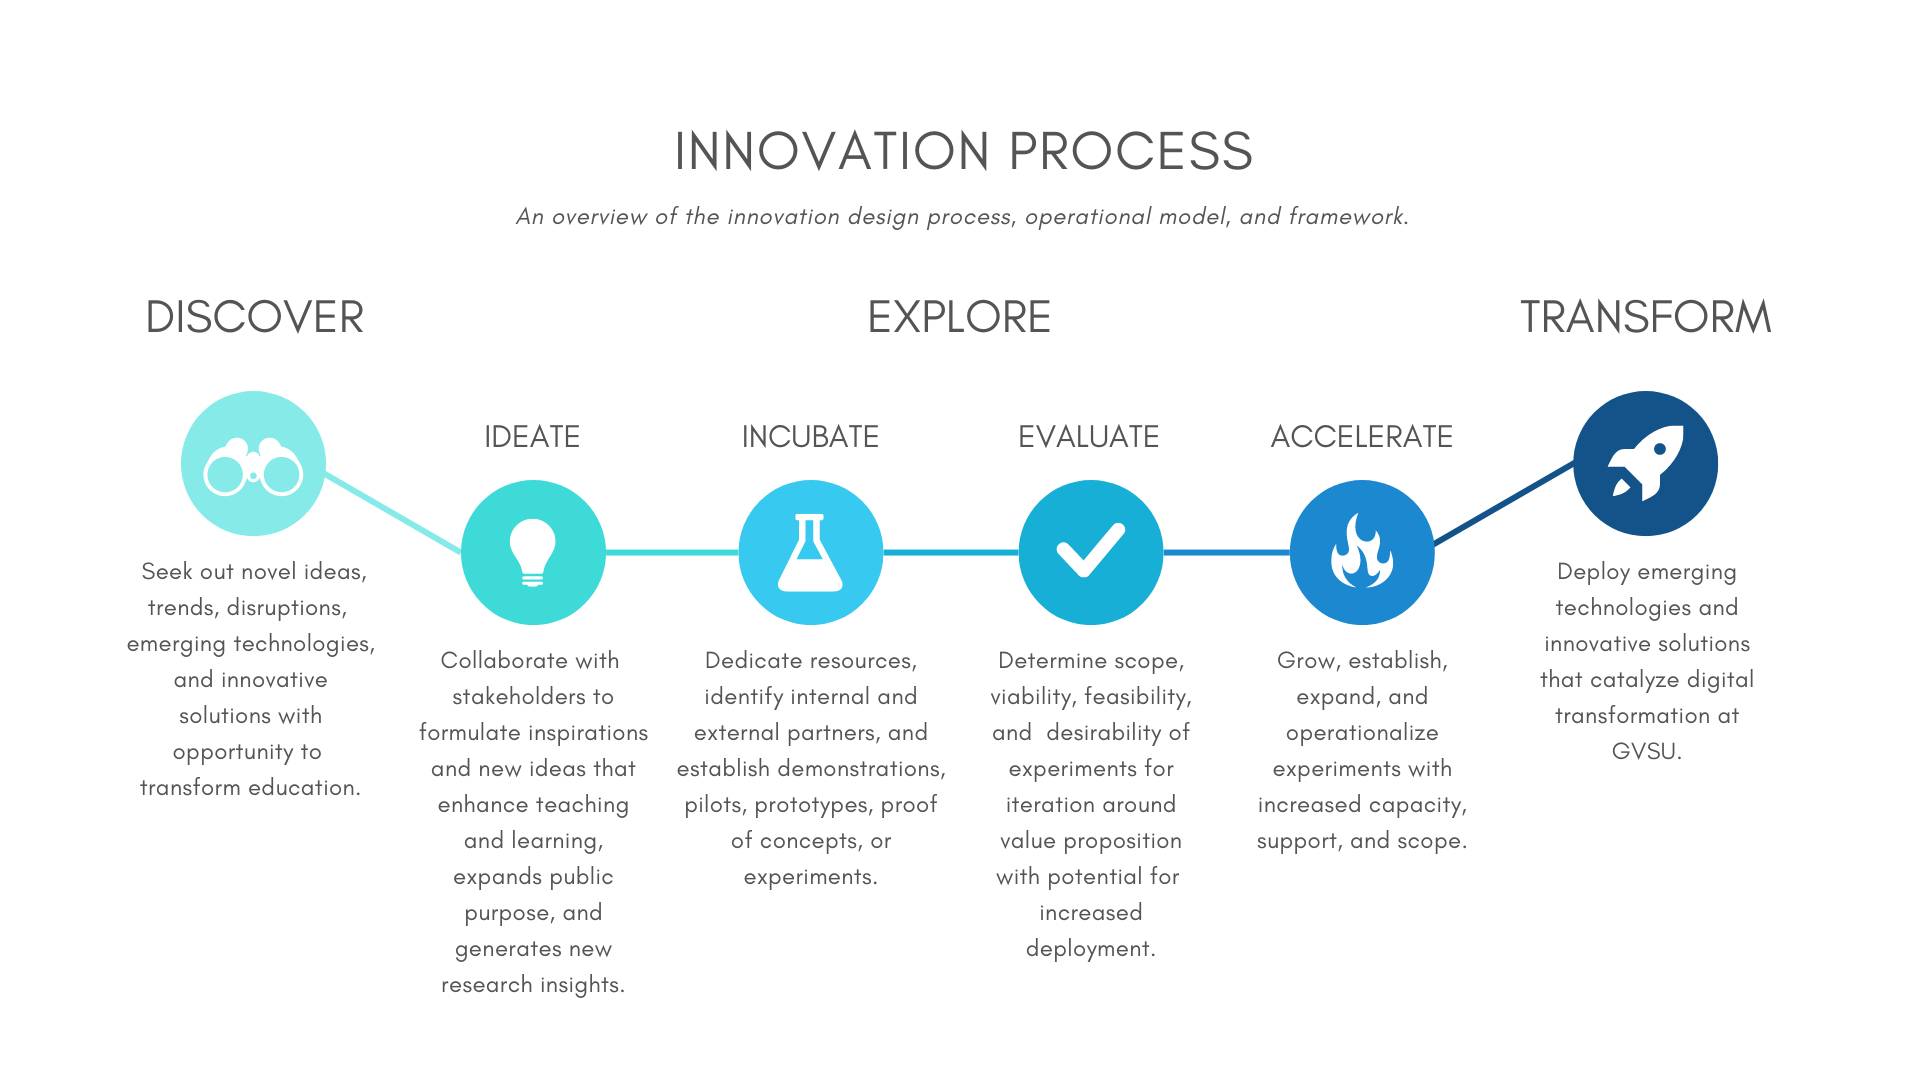 Innovation Process includes discovery, exploration, and transformation.